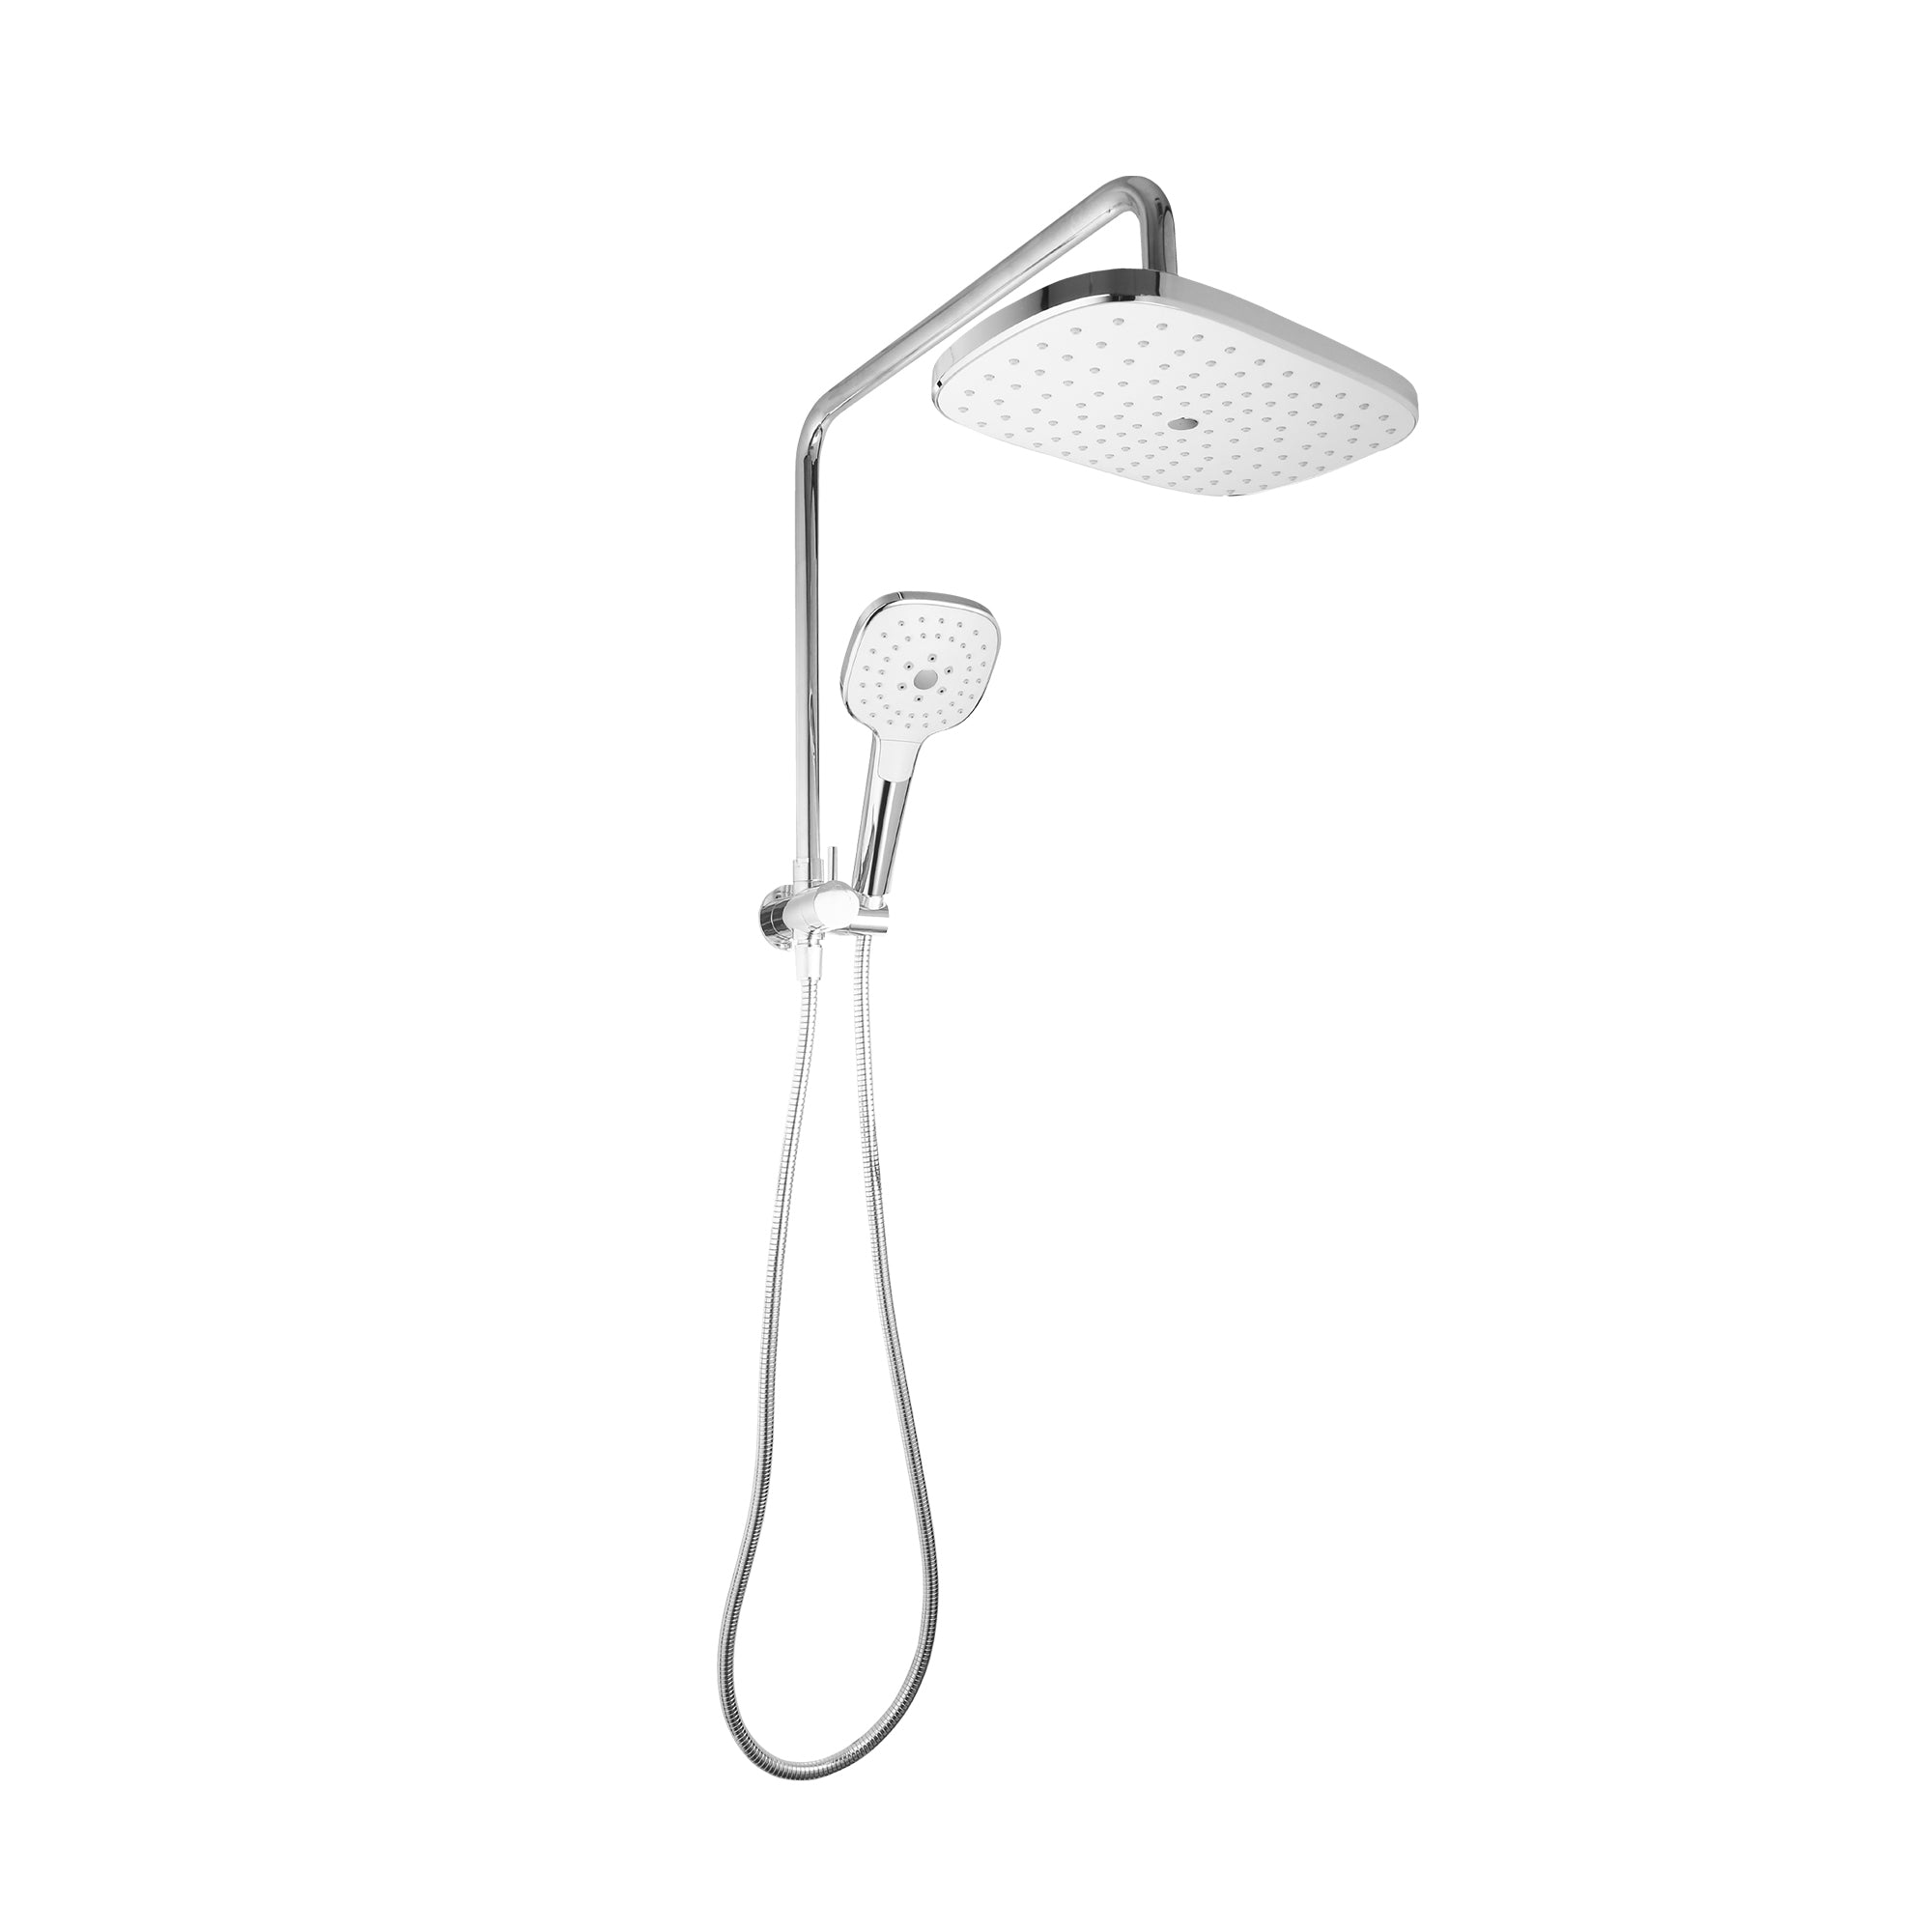 LINKWARE SELF CLEANING TWIN SHOWER SQUARE CHROME